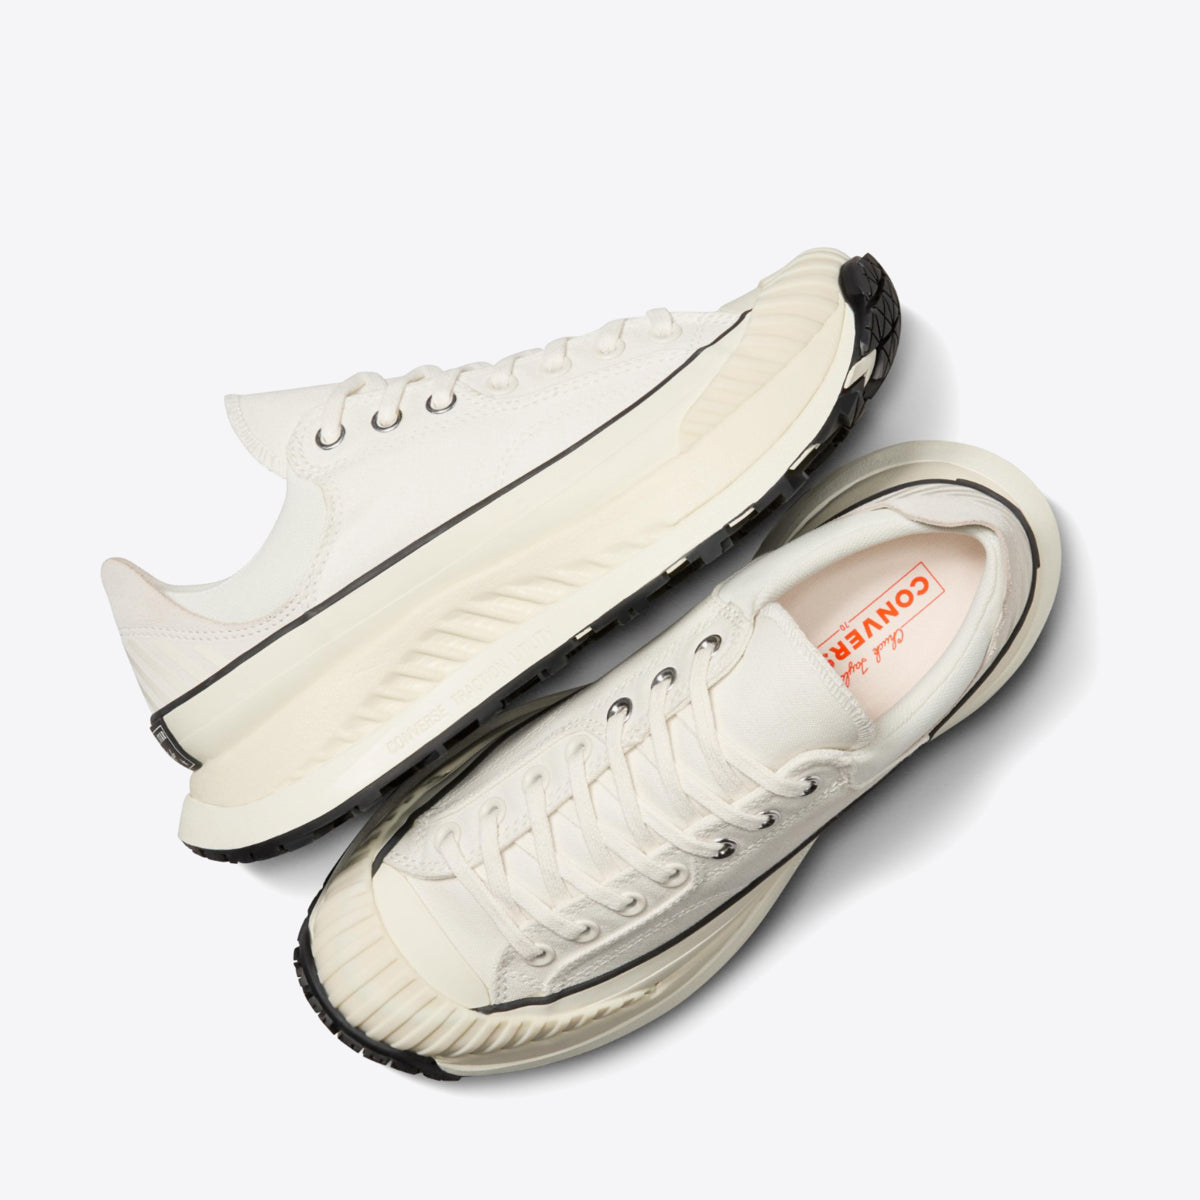 CONVERSE CT 70 AT Future Utility Low White - Image 4